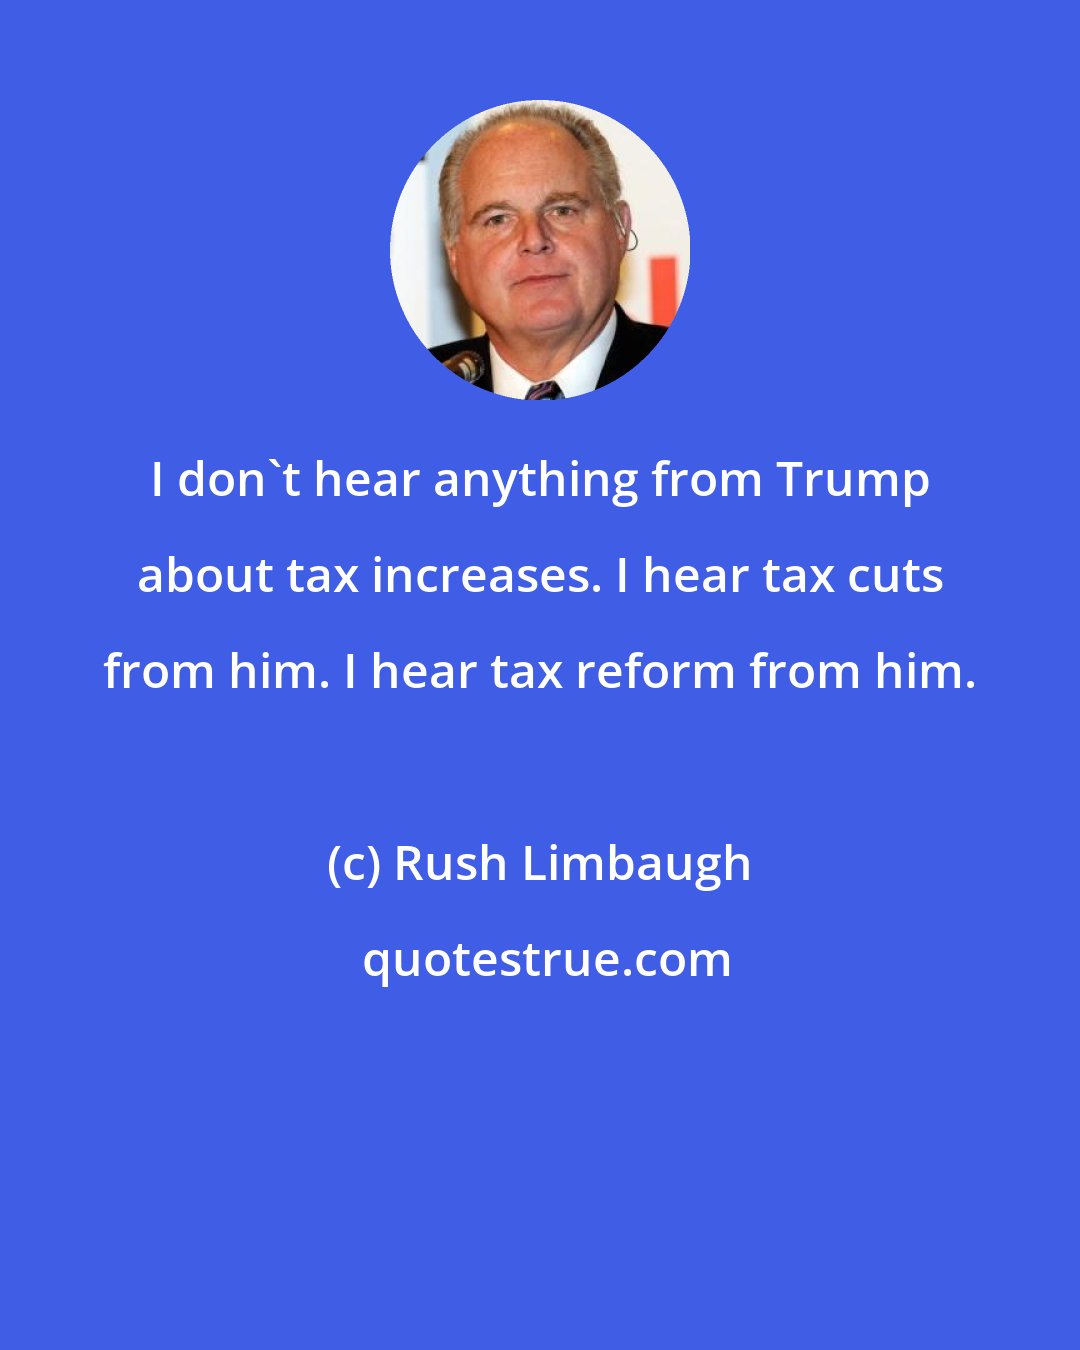 Rush Limbaugh: I don't hear anything from Trump about tax increases. I hear tax cuts from him. I hear tax reform from him.